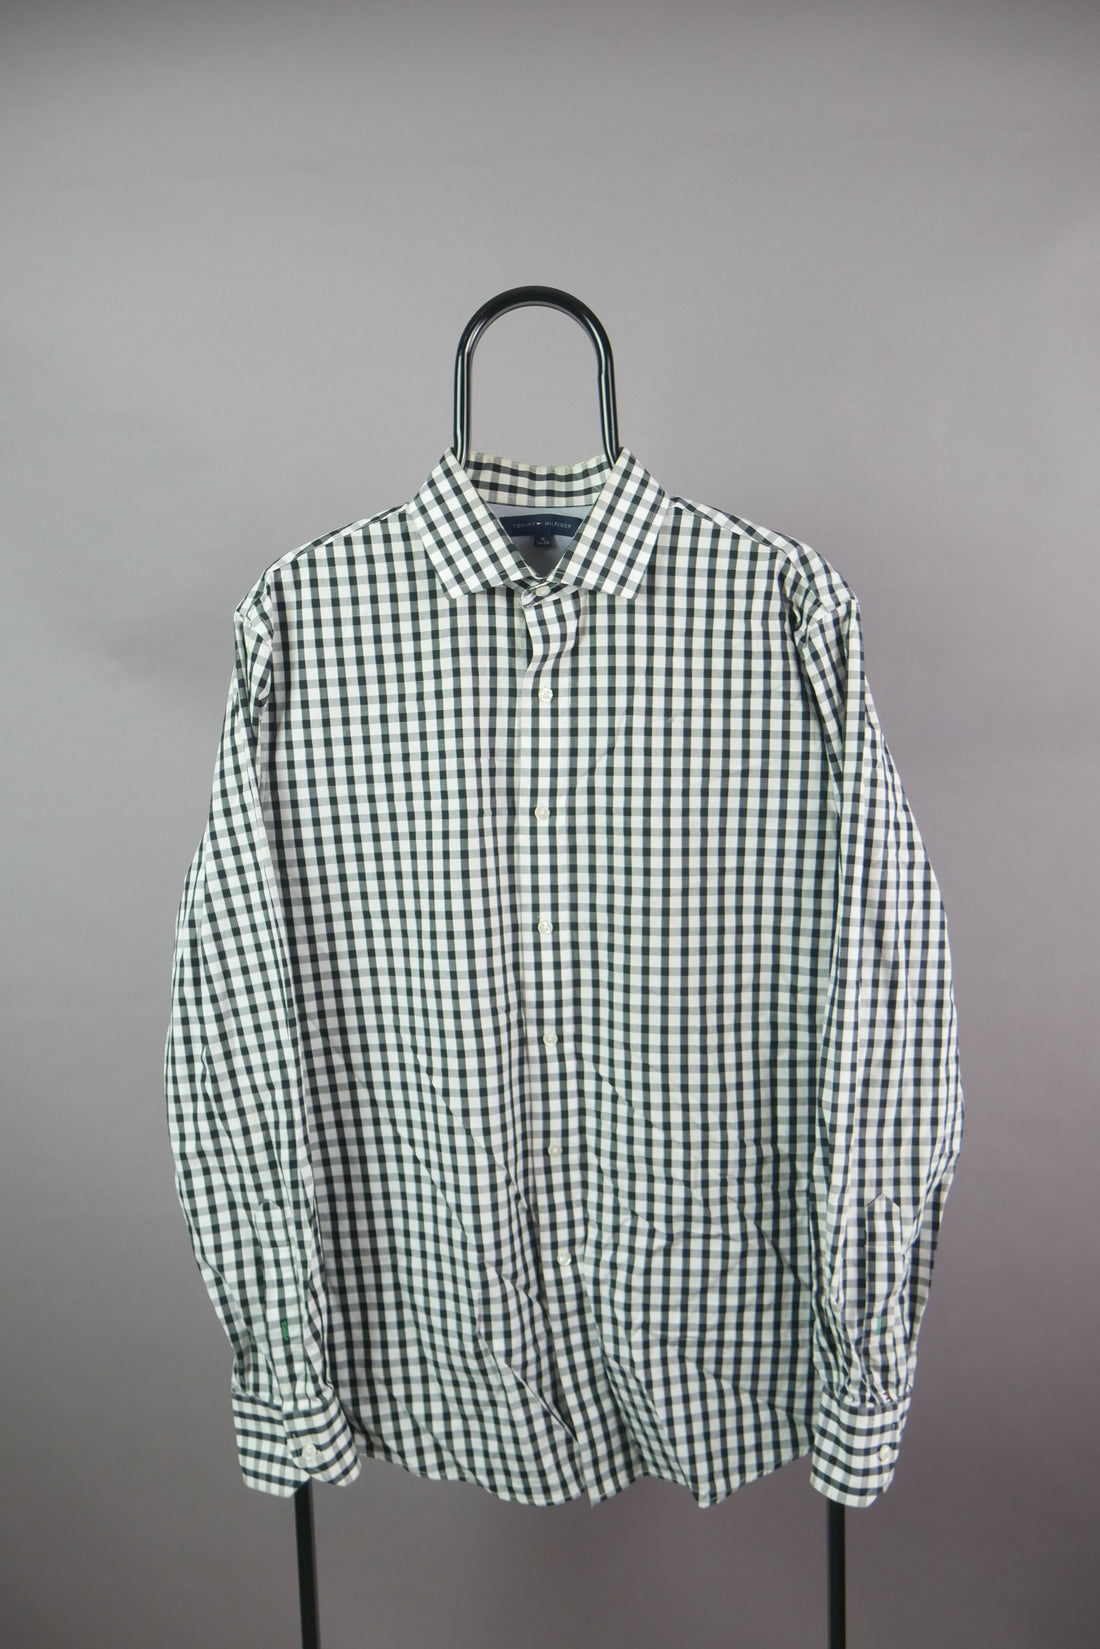 The Tommy Hilfiger Gingham Long Sleeve Shirt (M)